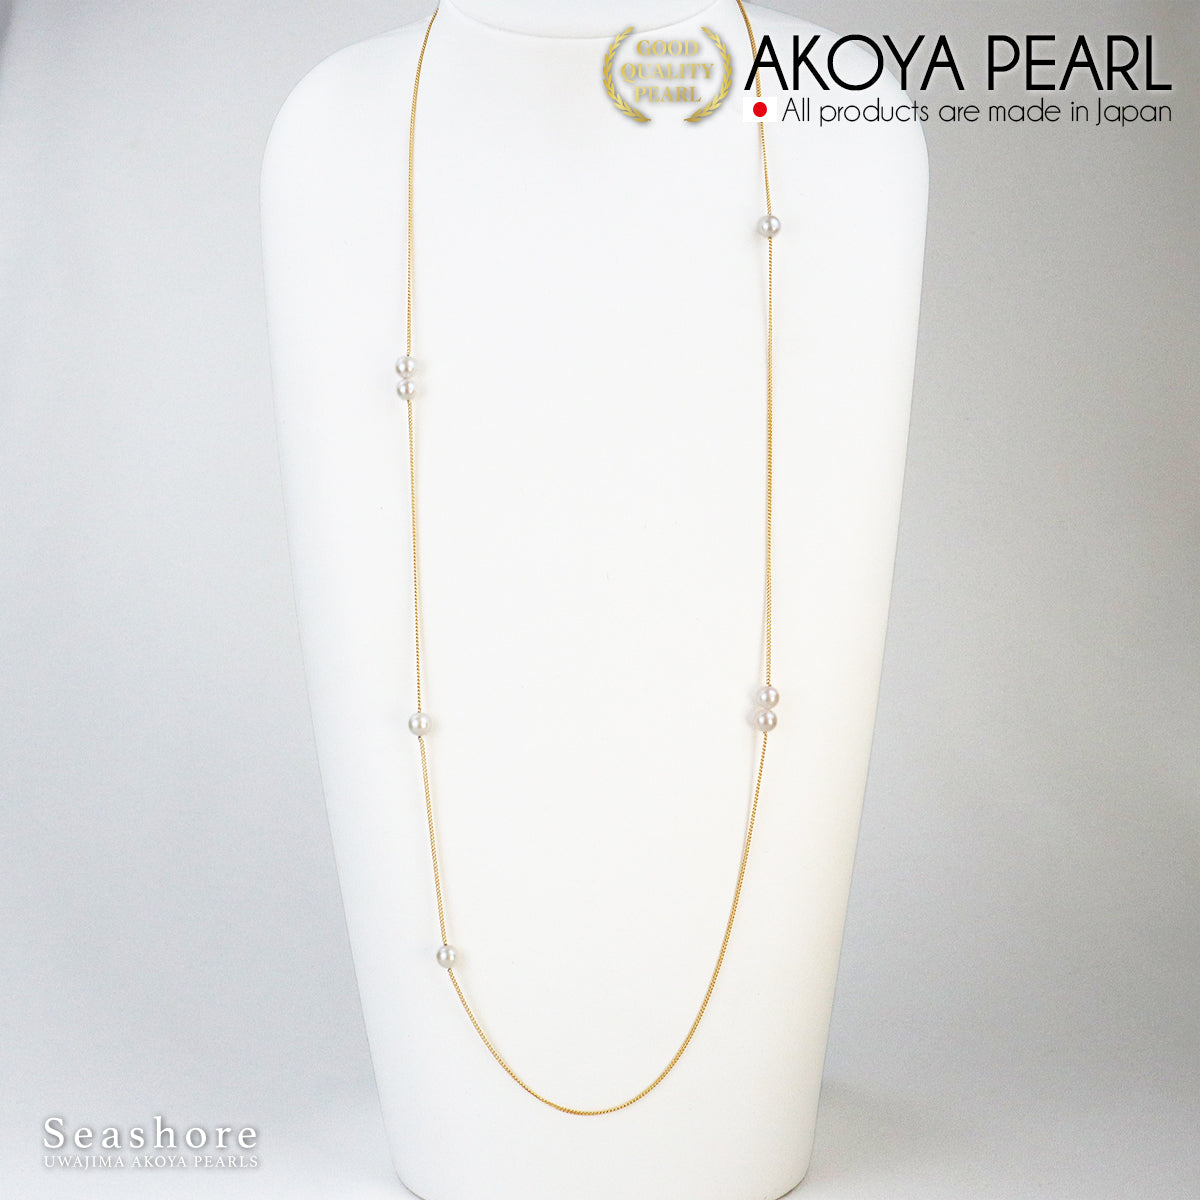 7 Akoya Pearls Long Necklace Station [6.5-7.0mm] Brass Rhodium/Gold Storage Case Included Pearl Necklace